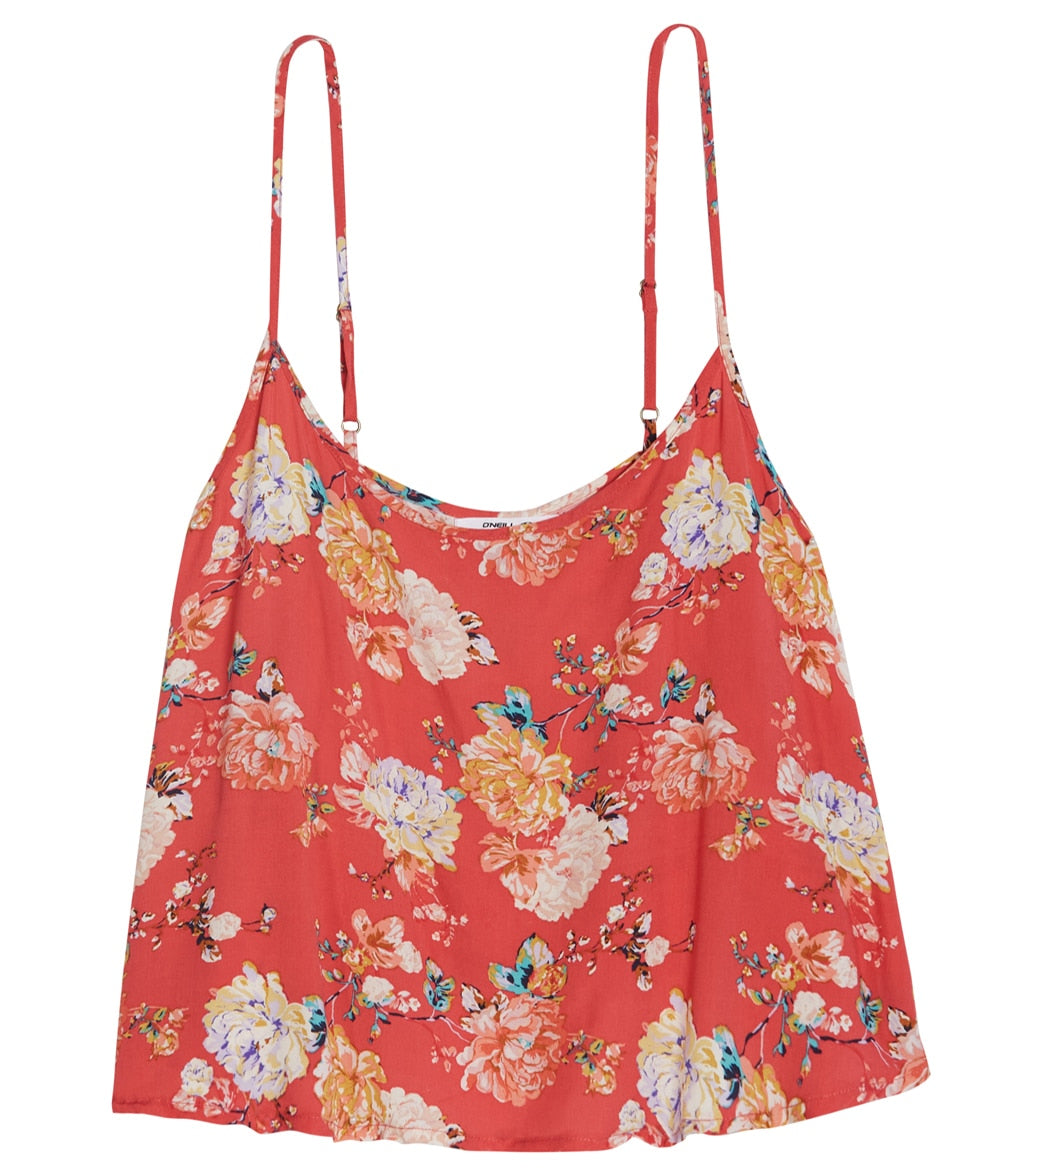 O'Neill Women's Emile Floral Tank at SwimOutlet.com